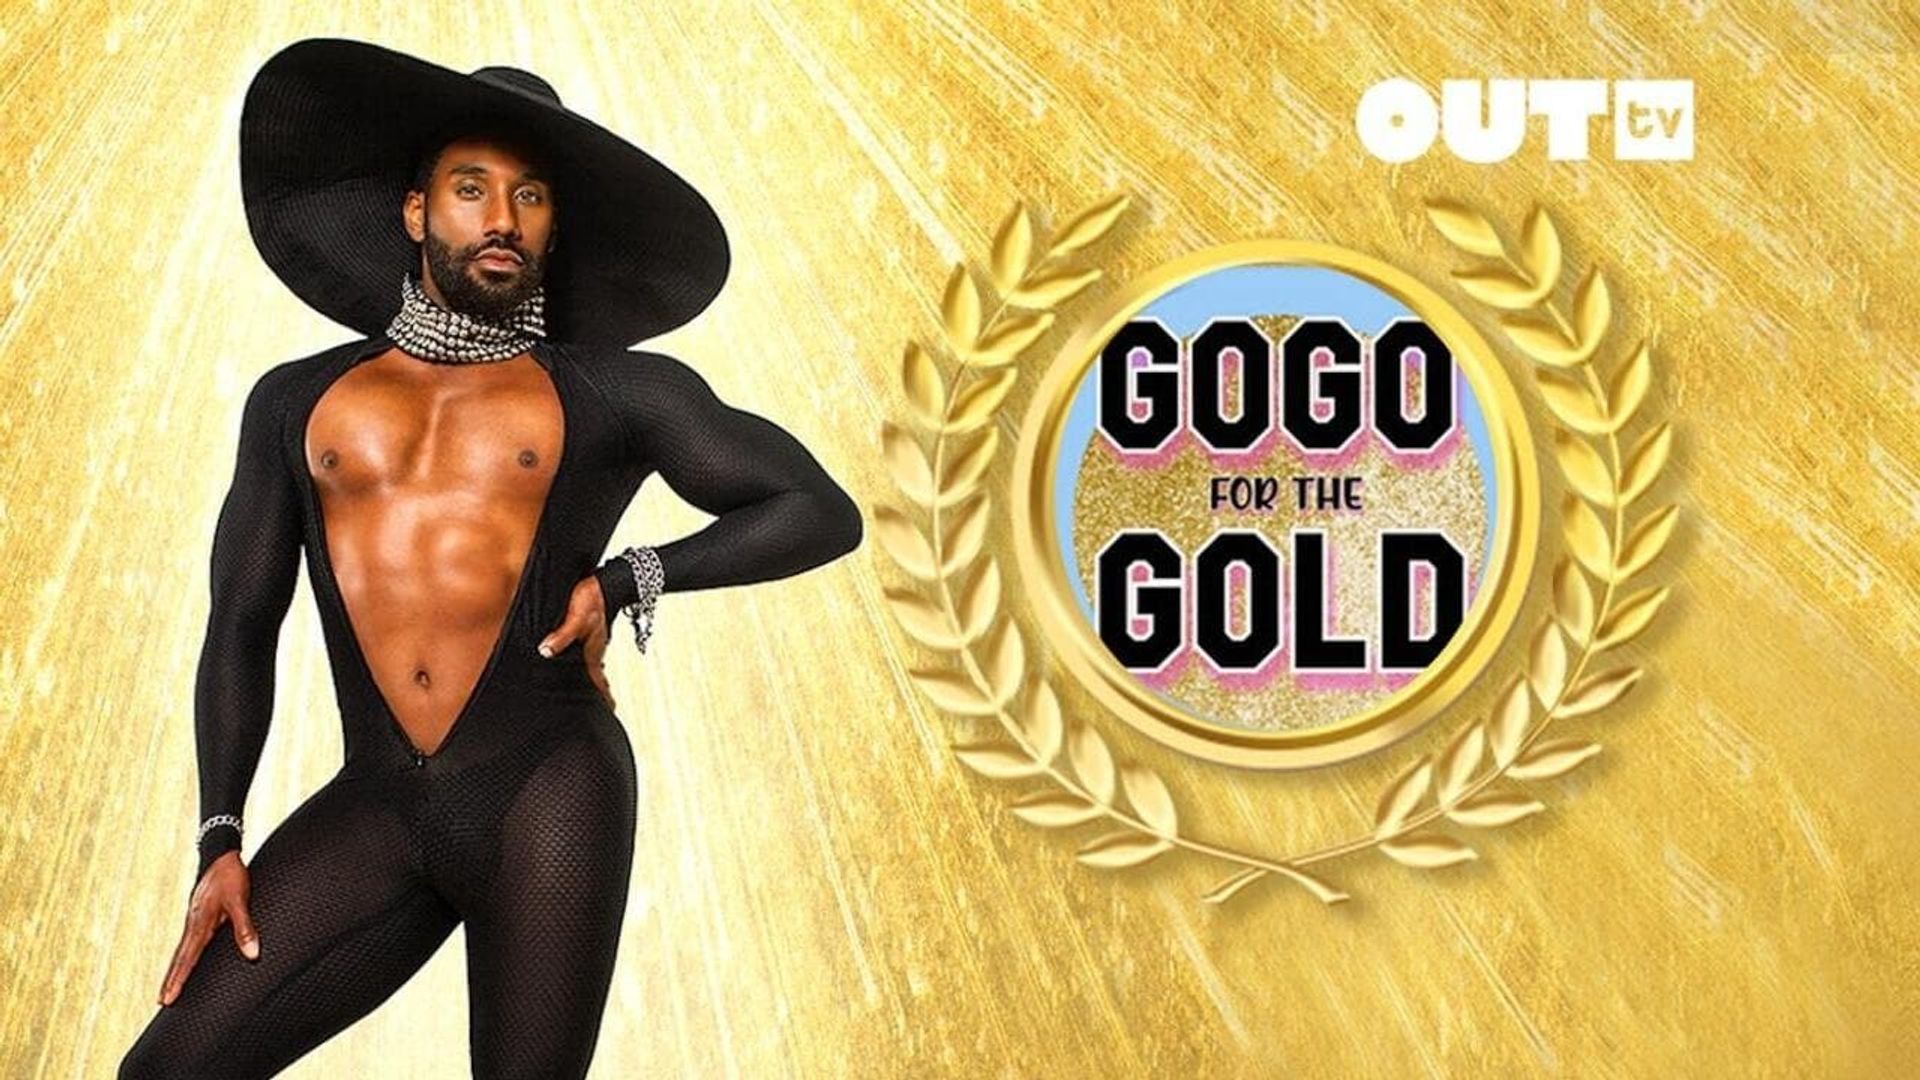 Gogo for the Gold background